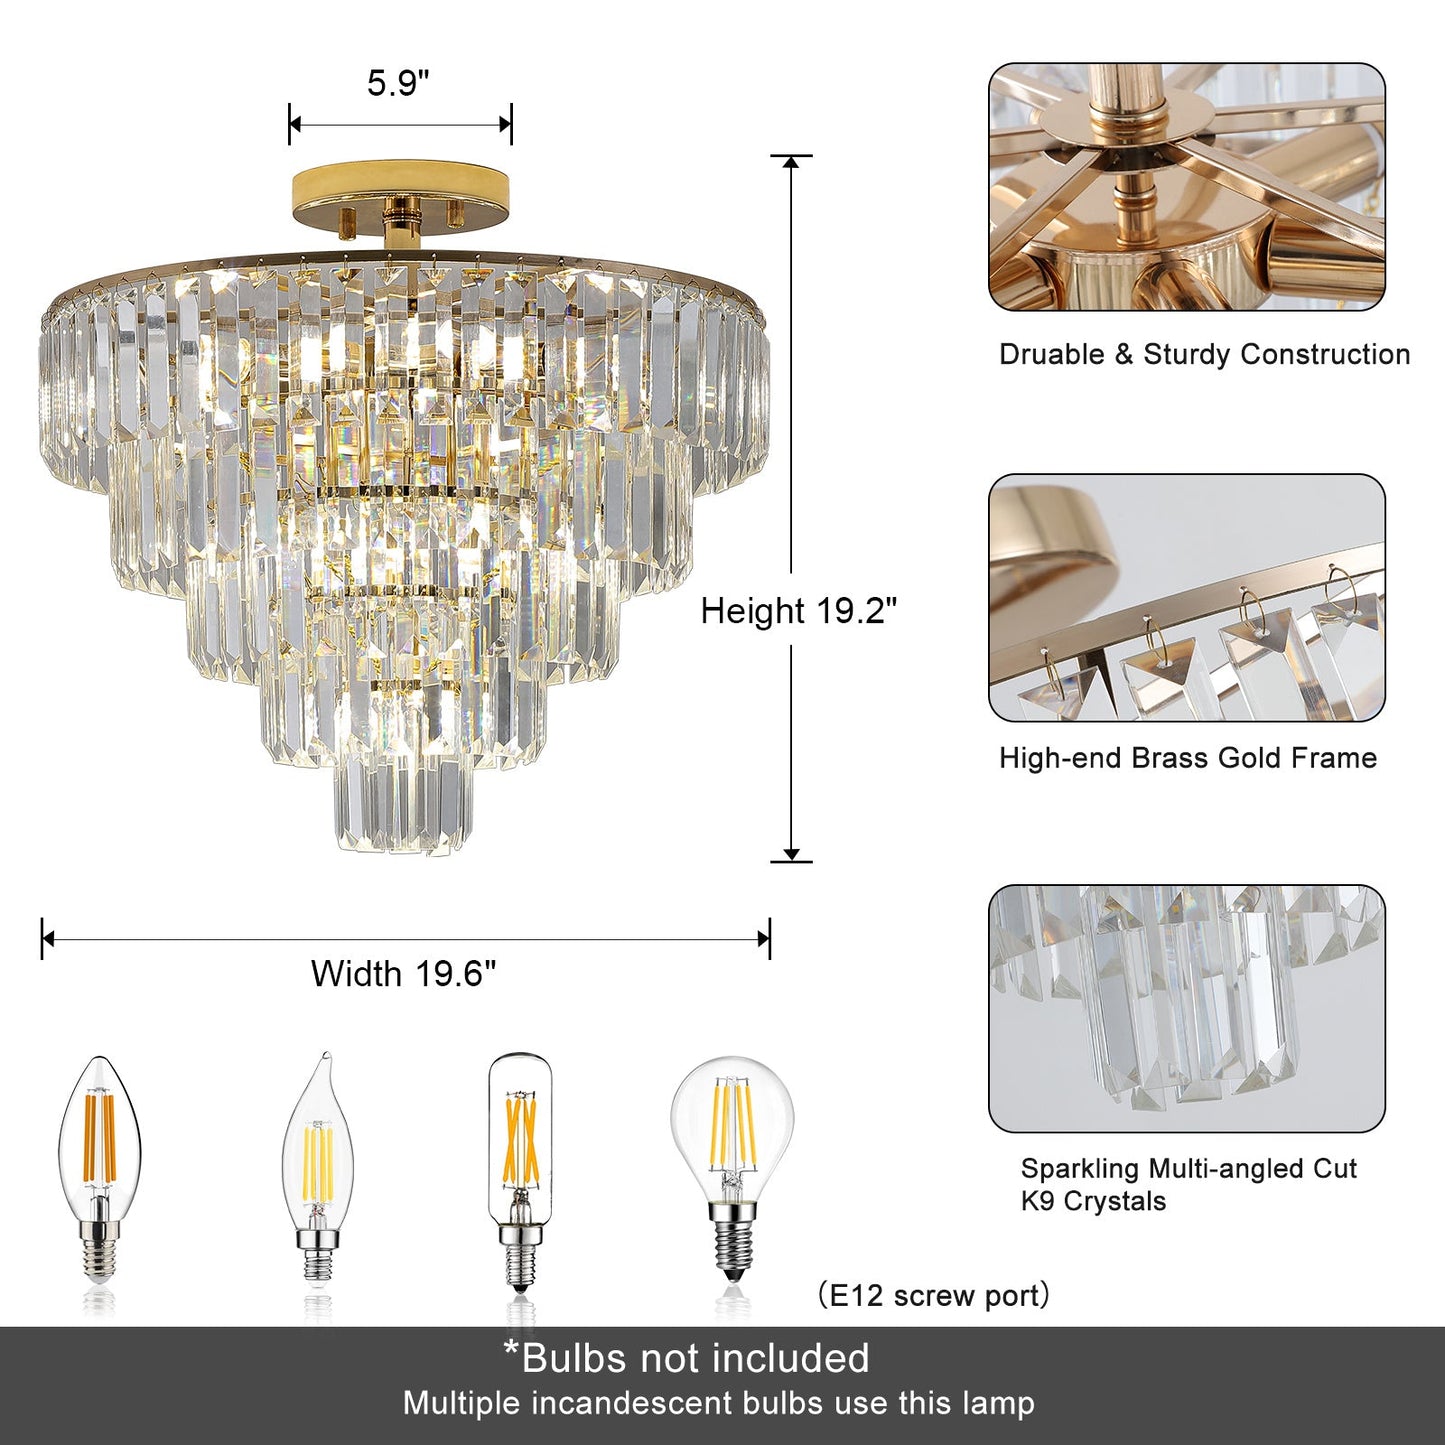 Gold Crystal Chandeliers,5-Tier Round Semi Flush Mount Chandelier Light Fixture,Large Contemporary Luxury Ceiling Lighting for Living Room Dining Room Bedroom Hallway Home Decor by Design